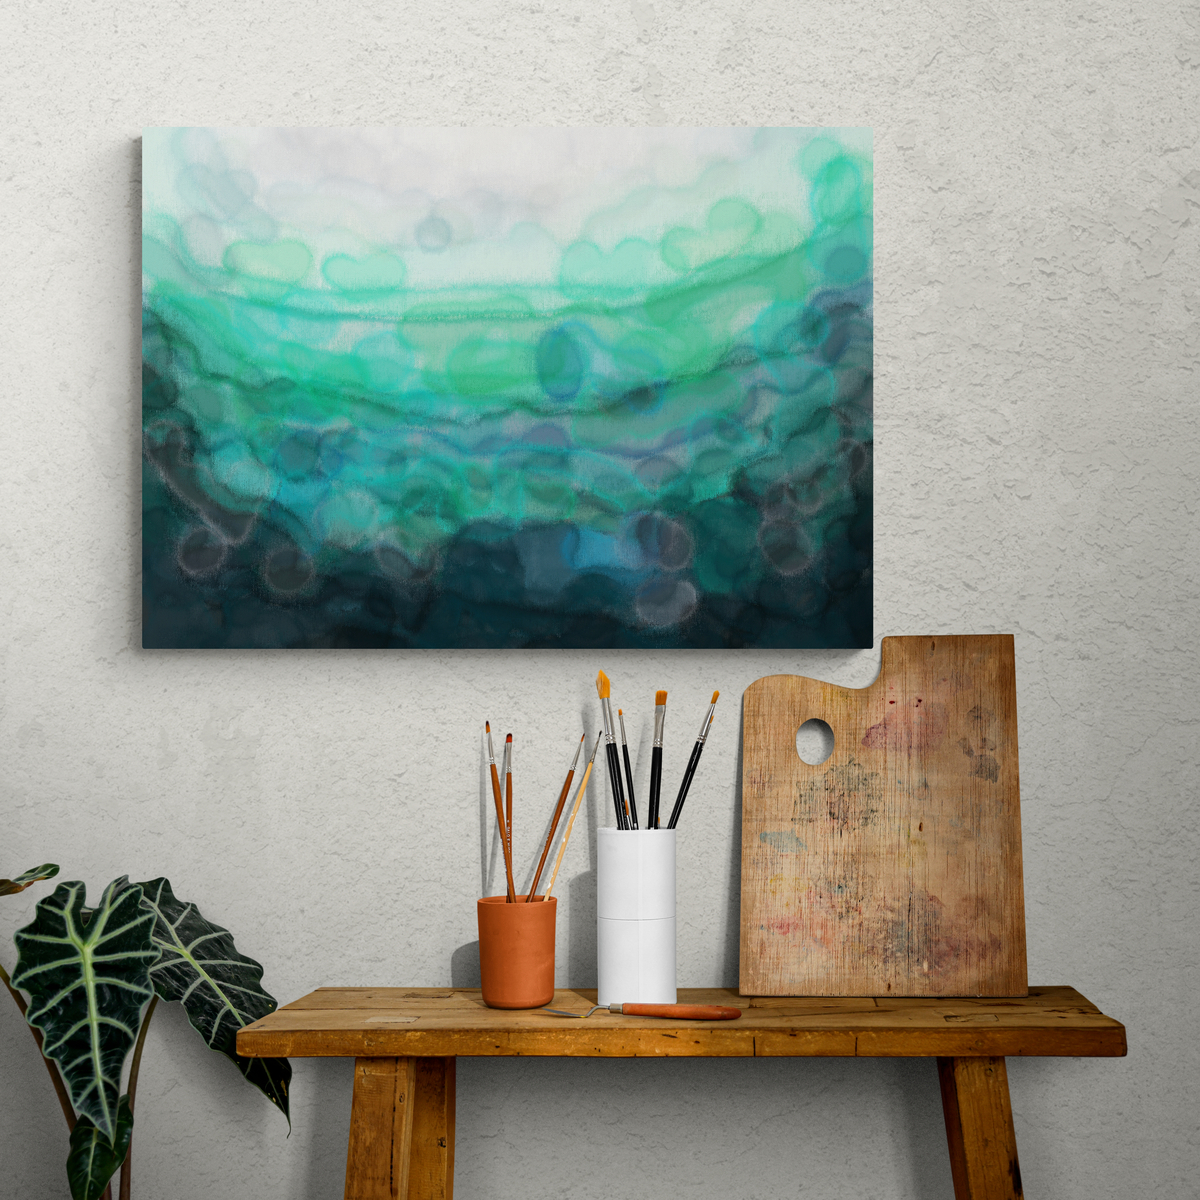 This Teal Serenity canvas print is soothing and meditative to look at.  Where would you hang it?   ☺️ 

Get yours here  👉  👉  👉  

#teal #watercolour #fluidart #minimalist #motion #canvasprint #canvasart #artwork #artist #abstractart tinyurl.com/2bm6abe8[...]